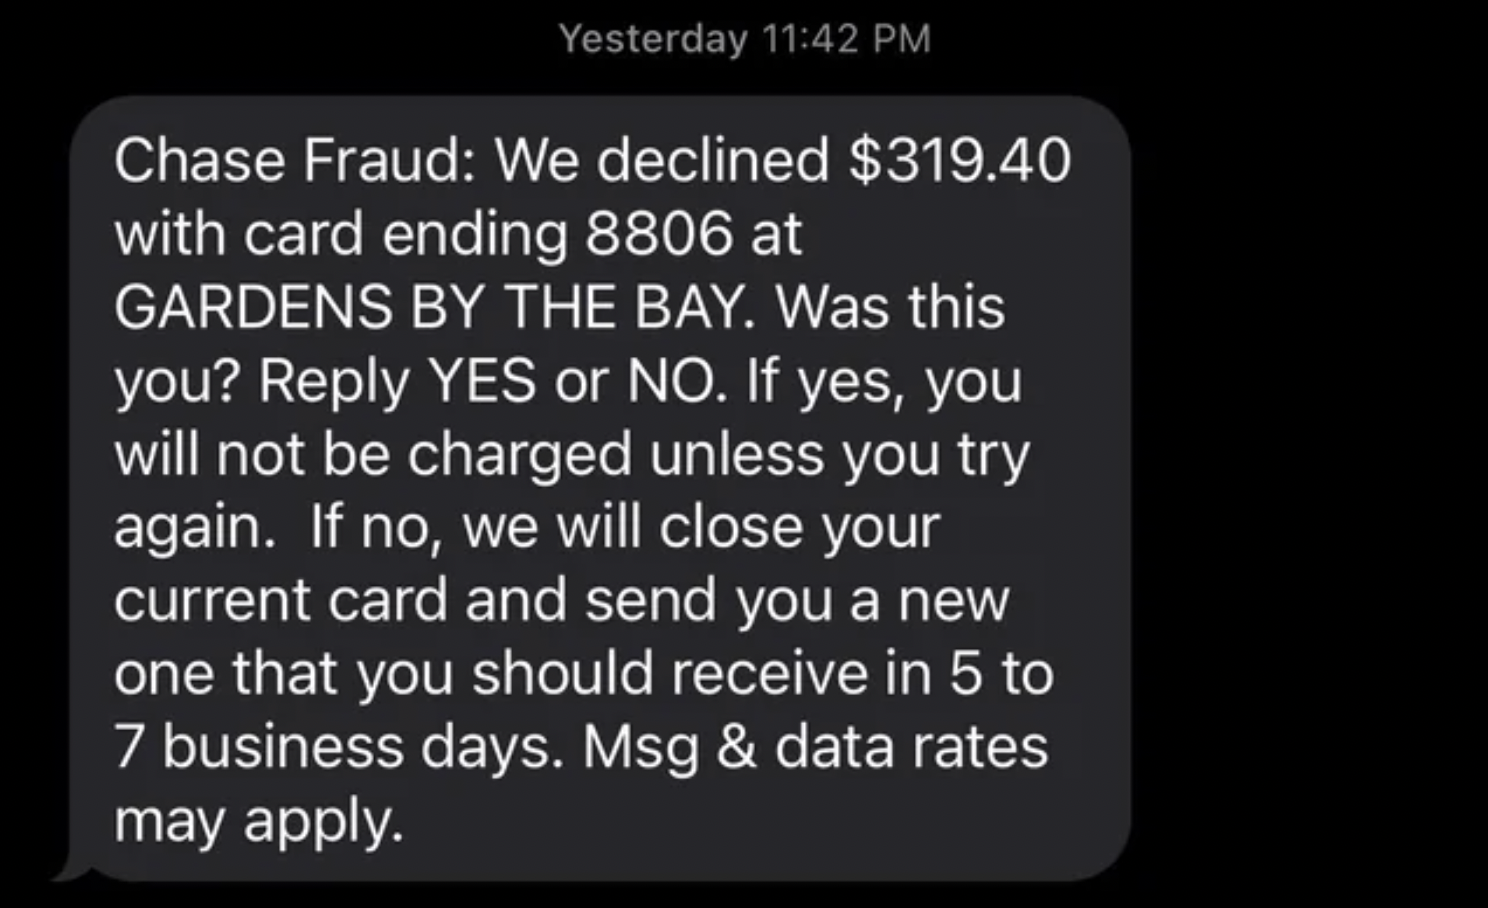 atmosphere - Yesterday Chase Fraud We declined $319.40 with card ending 8806 at Gardens By The Bay. Was this you? Yes or No. If yes, you will not be charged unless you try again. If no, we will close your current card and send you a new one that you shoul